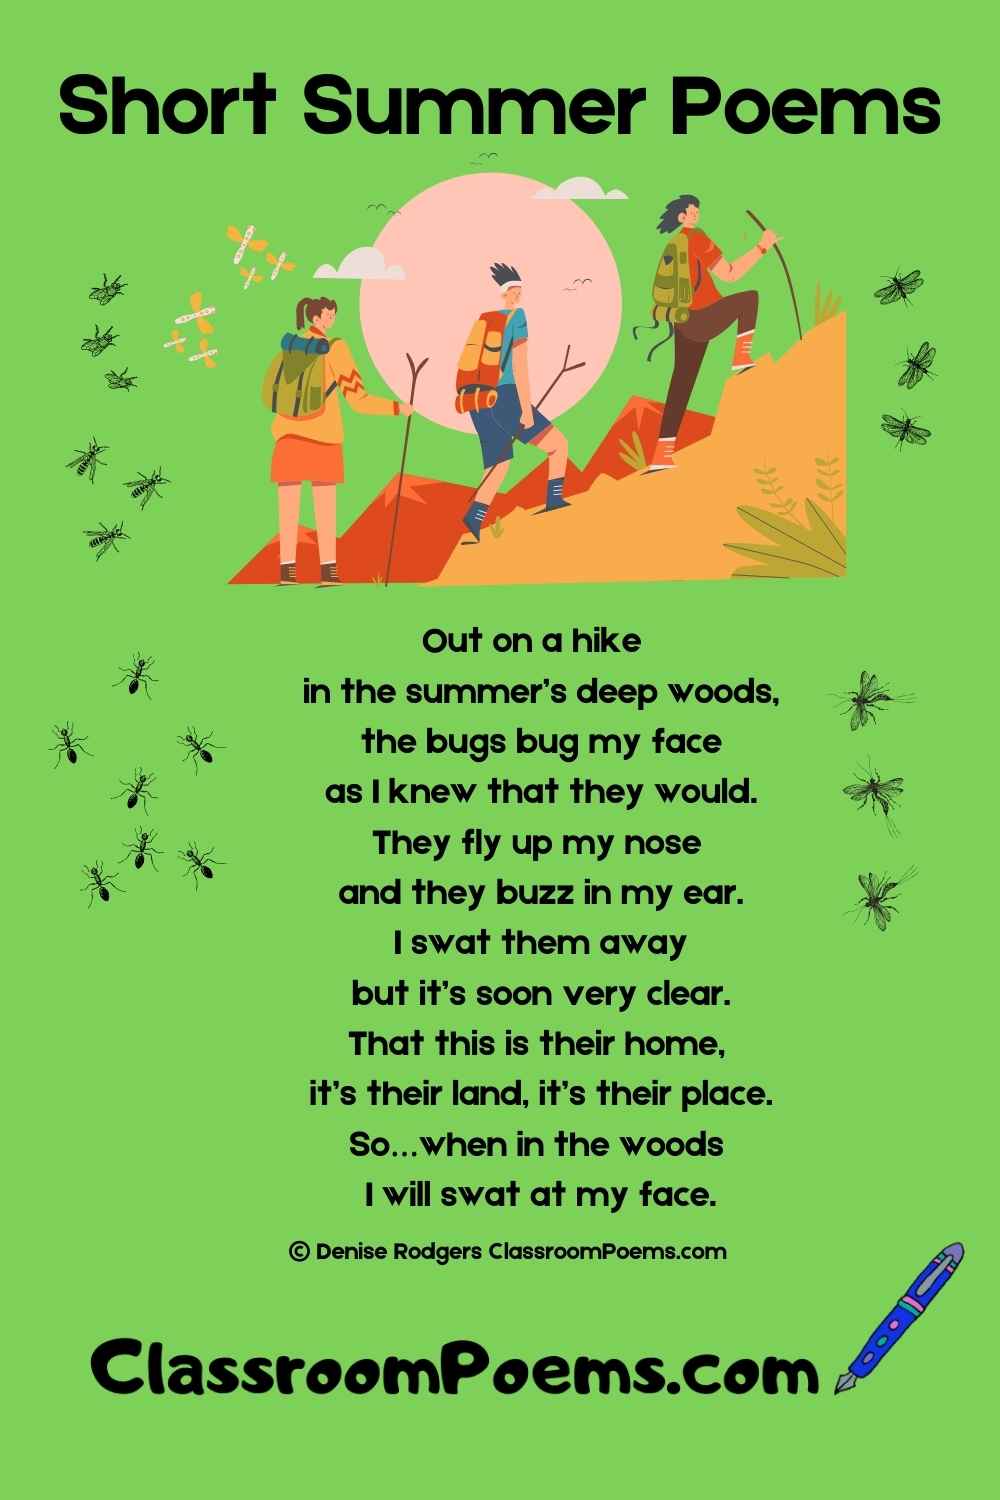 Summer poem about hiking by Denise Rodgers on ClassroomPoems.com.